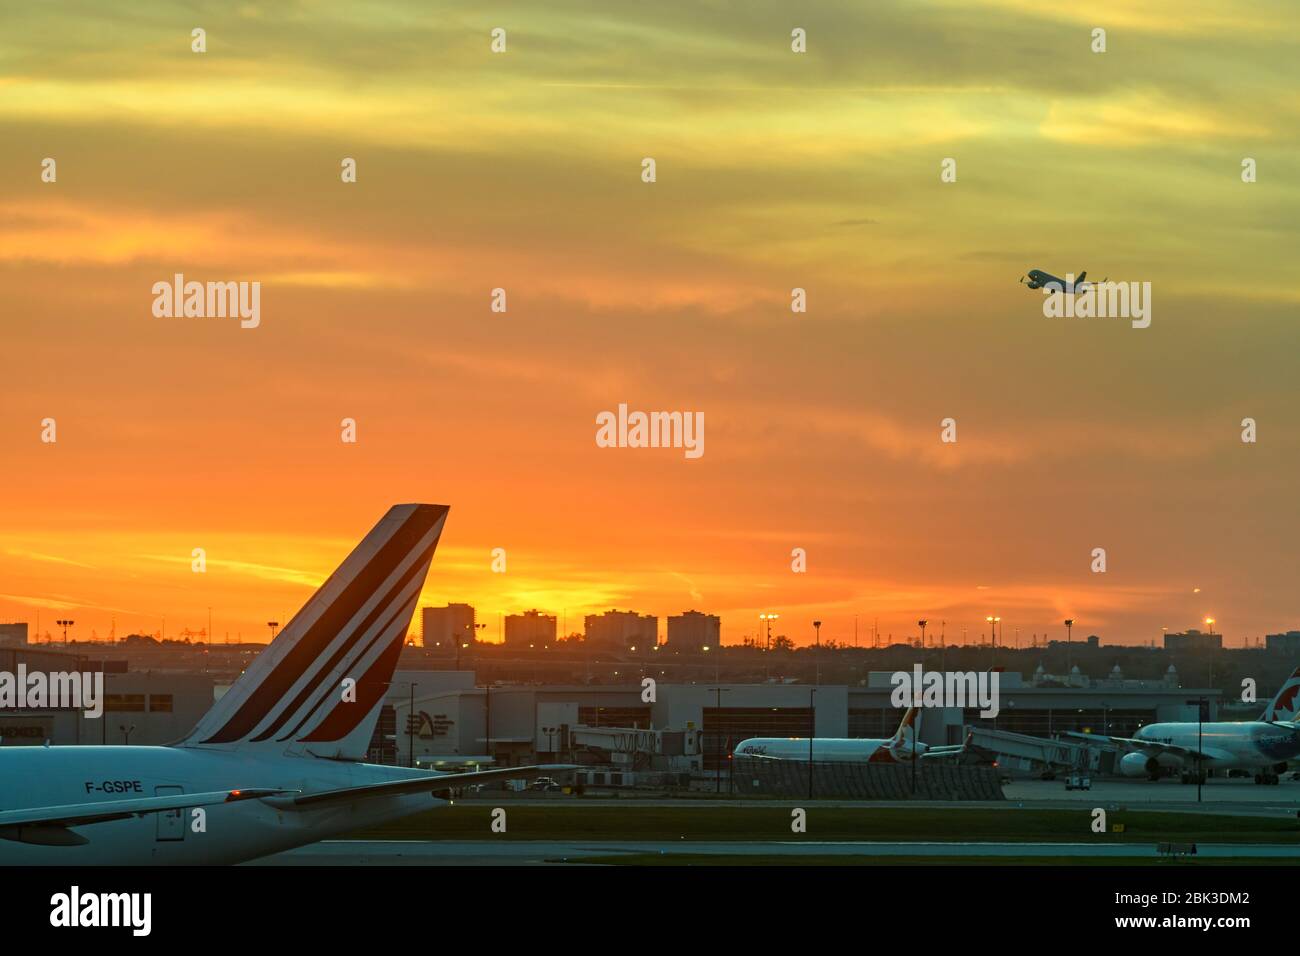 Aircraft taking off against an evening sky, Toronto, Ontario, Canada Stock Photo